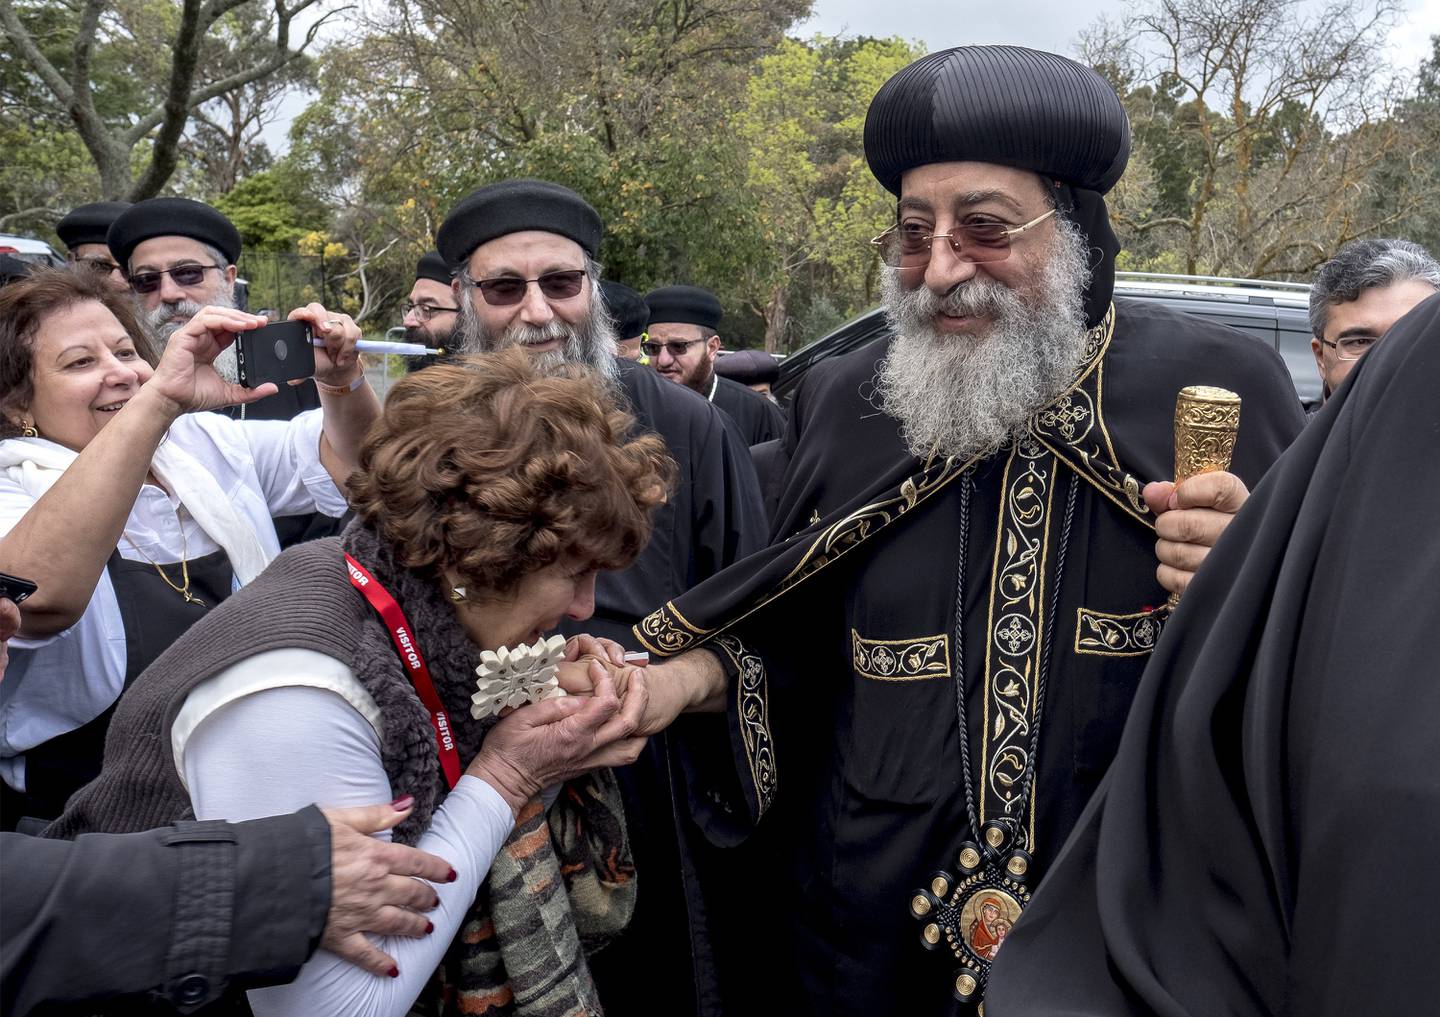 epa06188962 Pope Tawadros II of Alexandria (R), the Patriarch of the Coptic Orthodox Church, is greeted on his arrival at the Diocesan Headquarters in Melbourne, Victoria, Australia, 07 September 2017. The Coptic Pope is in Australia for a 10-day tour to schools and churches in Sydney, Melbourne and Canberra.  EPA/LUIS ASCUI  AUSTRALIA AND NEW ZEALAND OUT